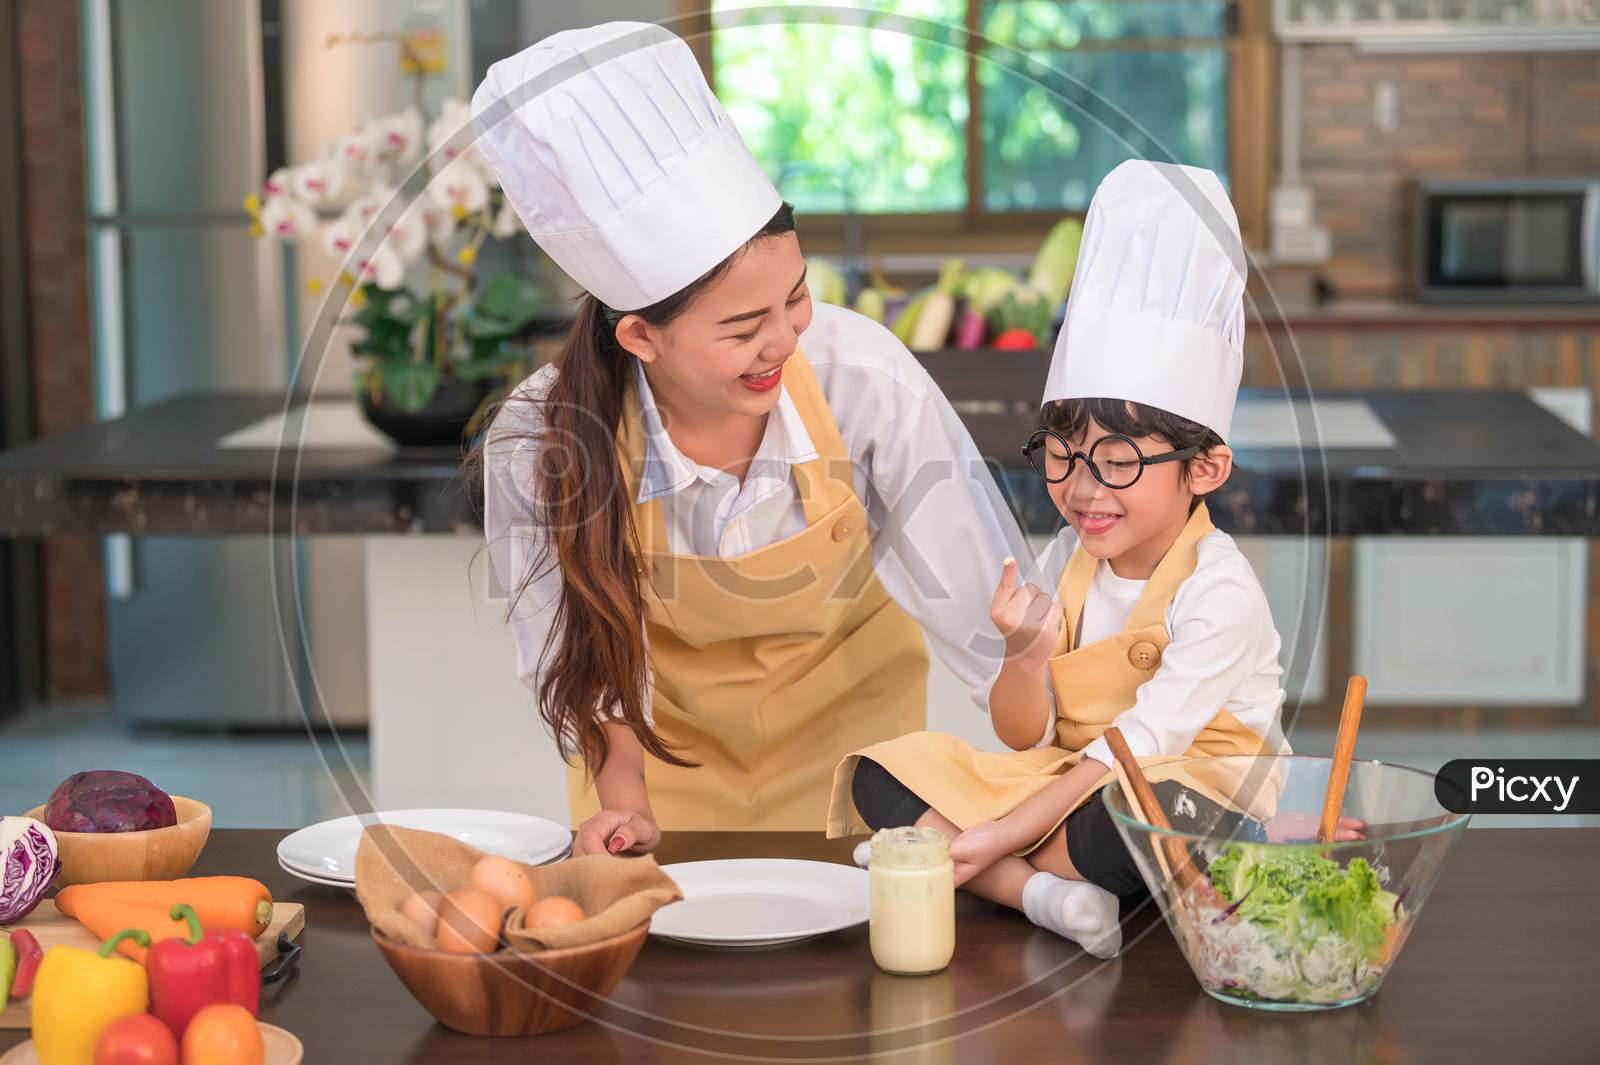 Happy Beautiful Asian Woman And Cute Little Boy With Eyeglasses Prepare To Cooking In Kitchen At Home. People And Family Concept. Homemade Food And Ingredients Concept. Two Thai People Lifestyles